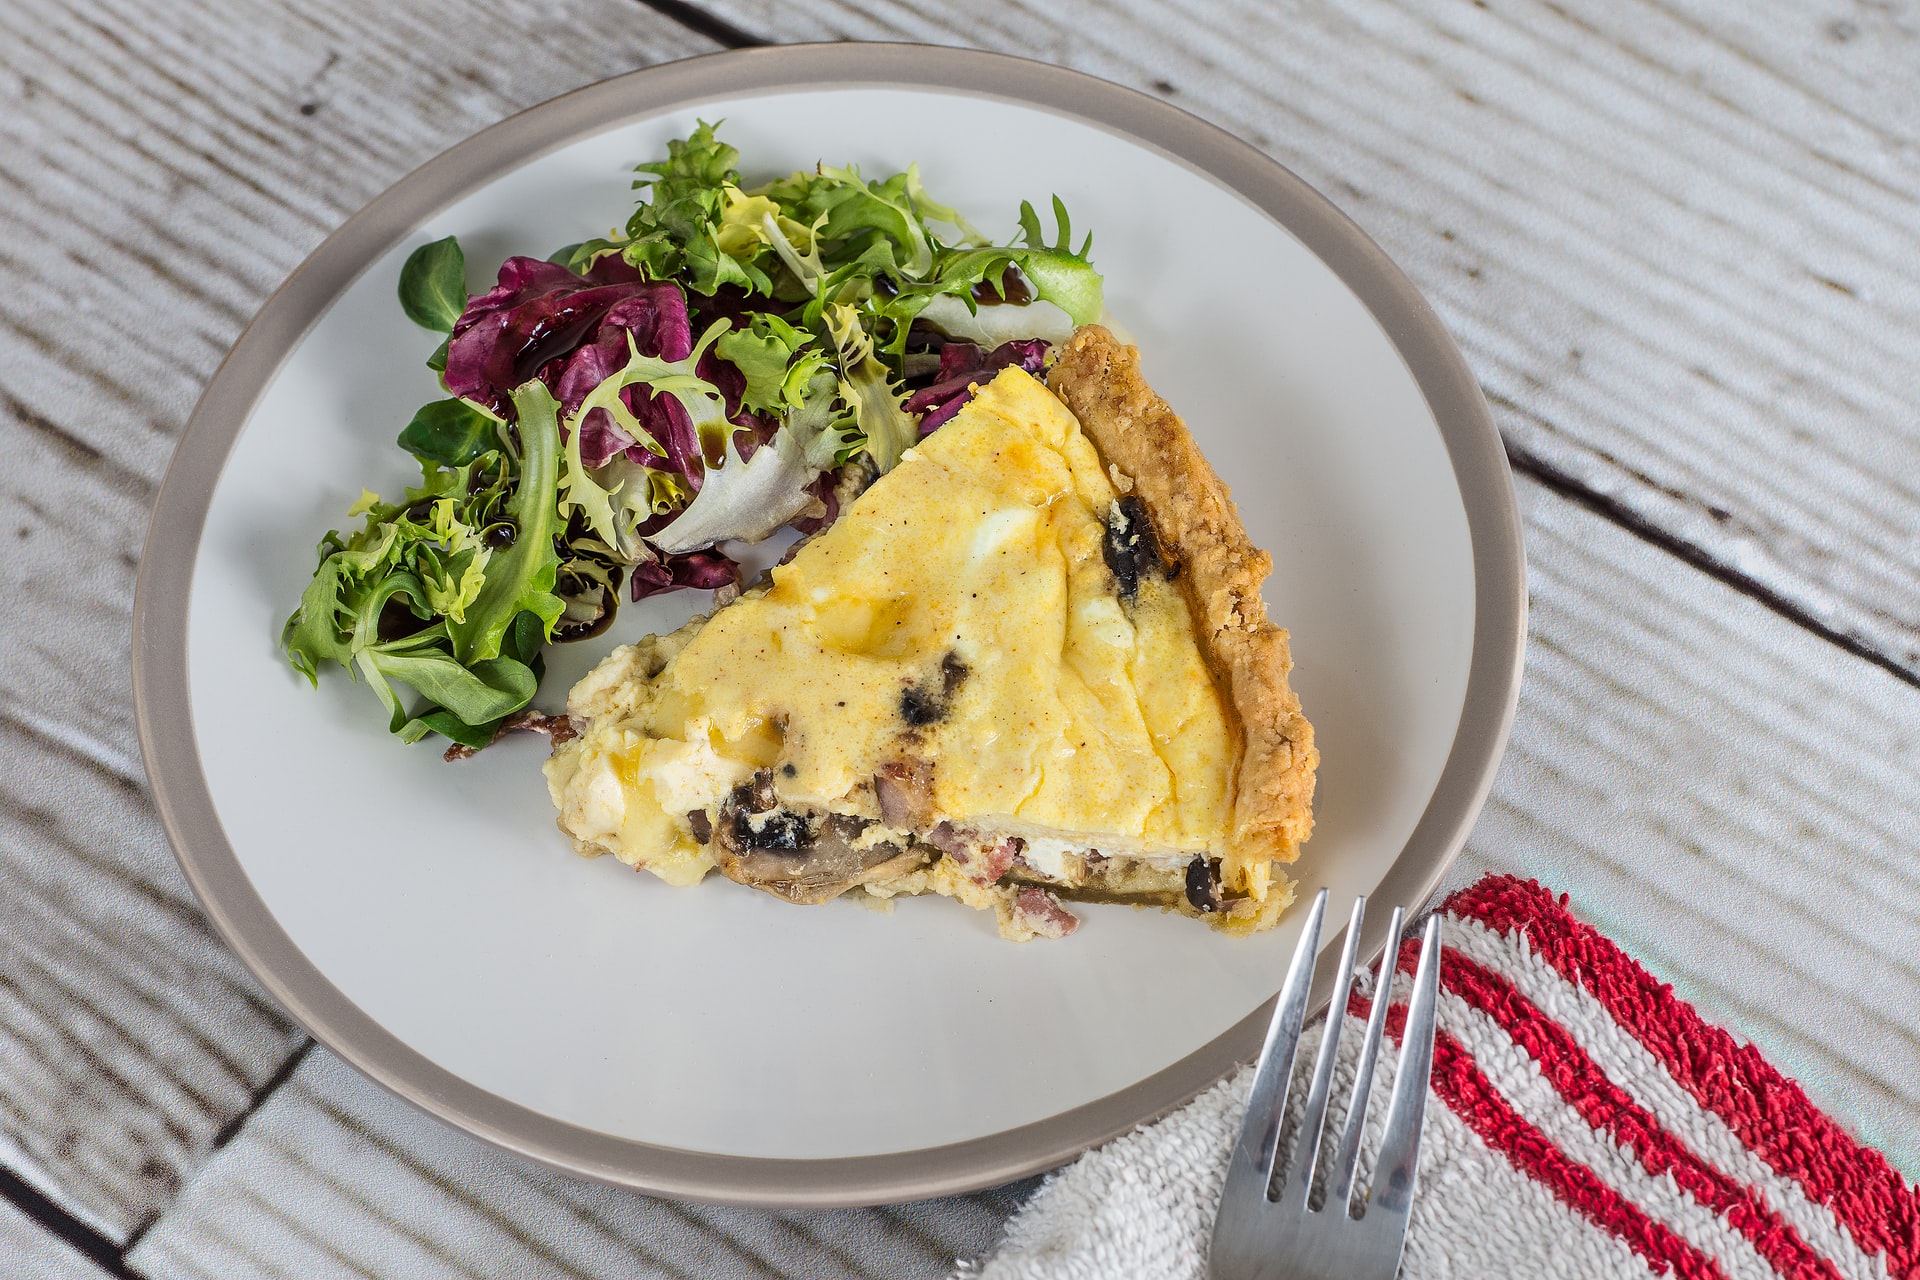 A quiche with mushrooms on a plate with a salad on the side.